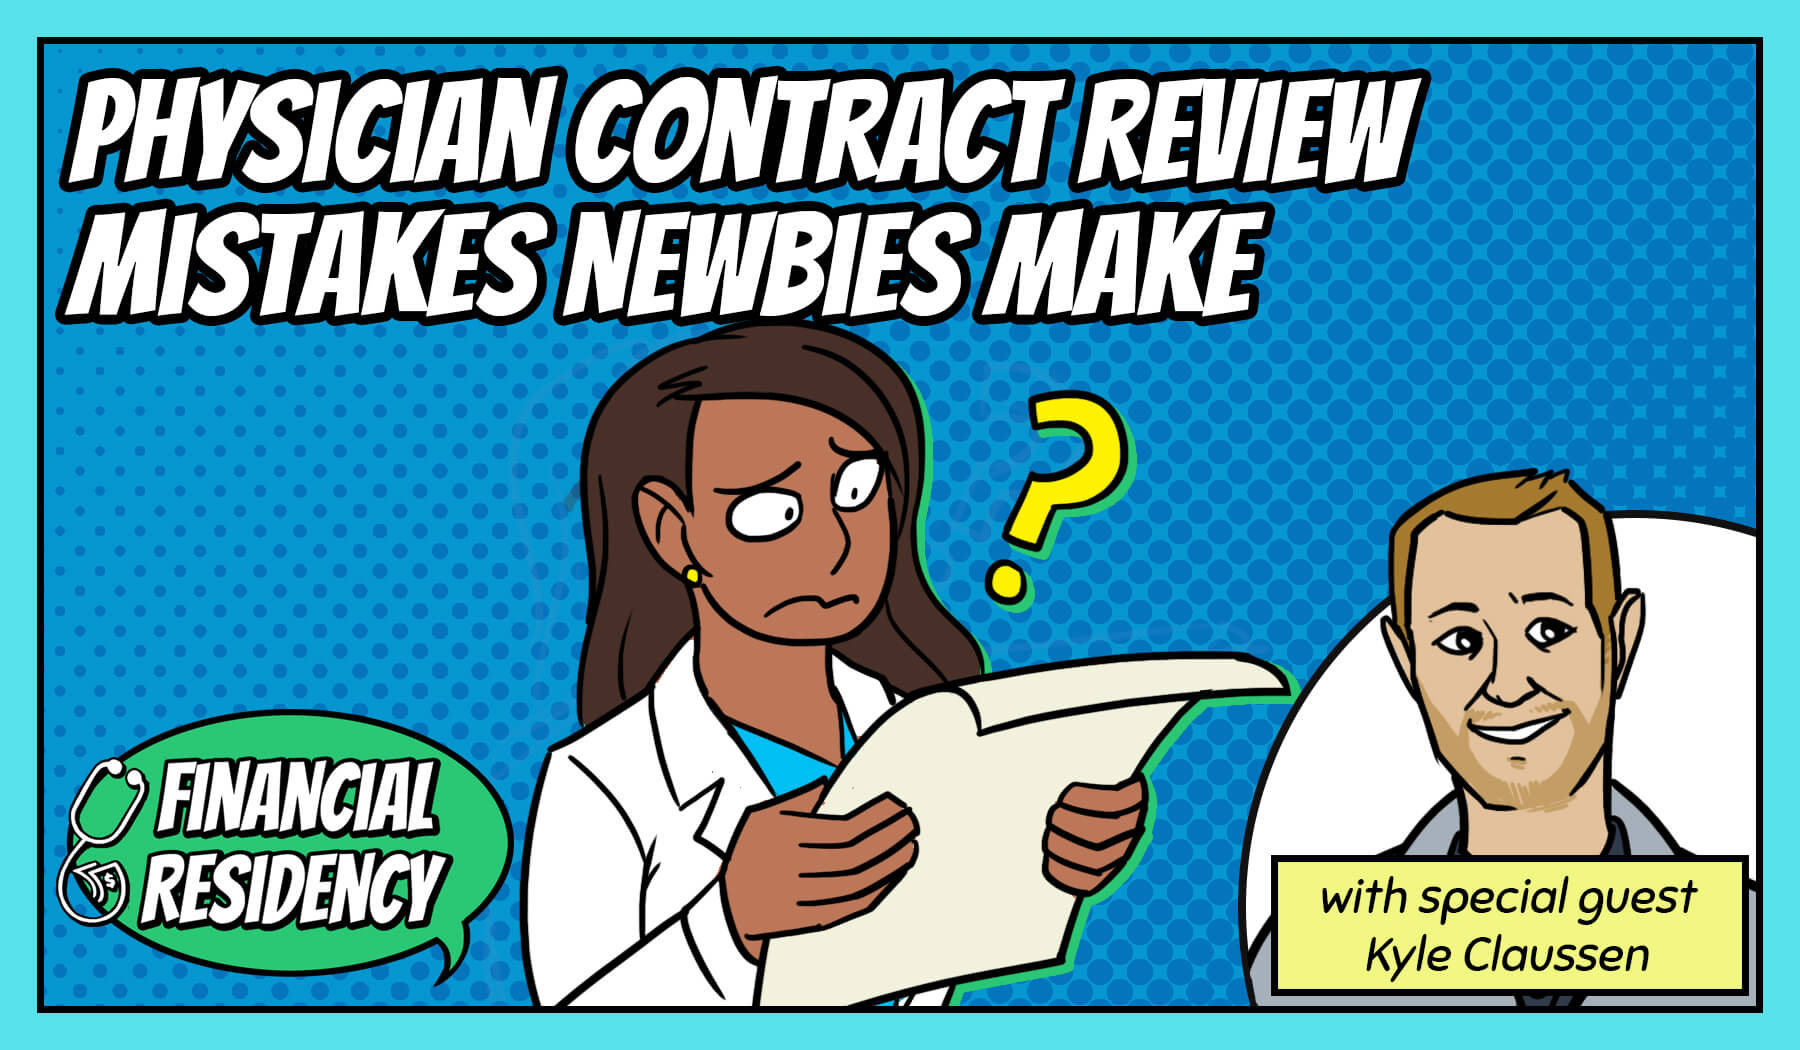 Physician-Contract-Review-Mistakes-Newbies-Make